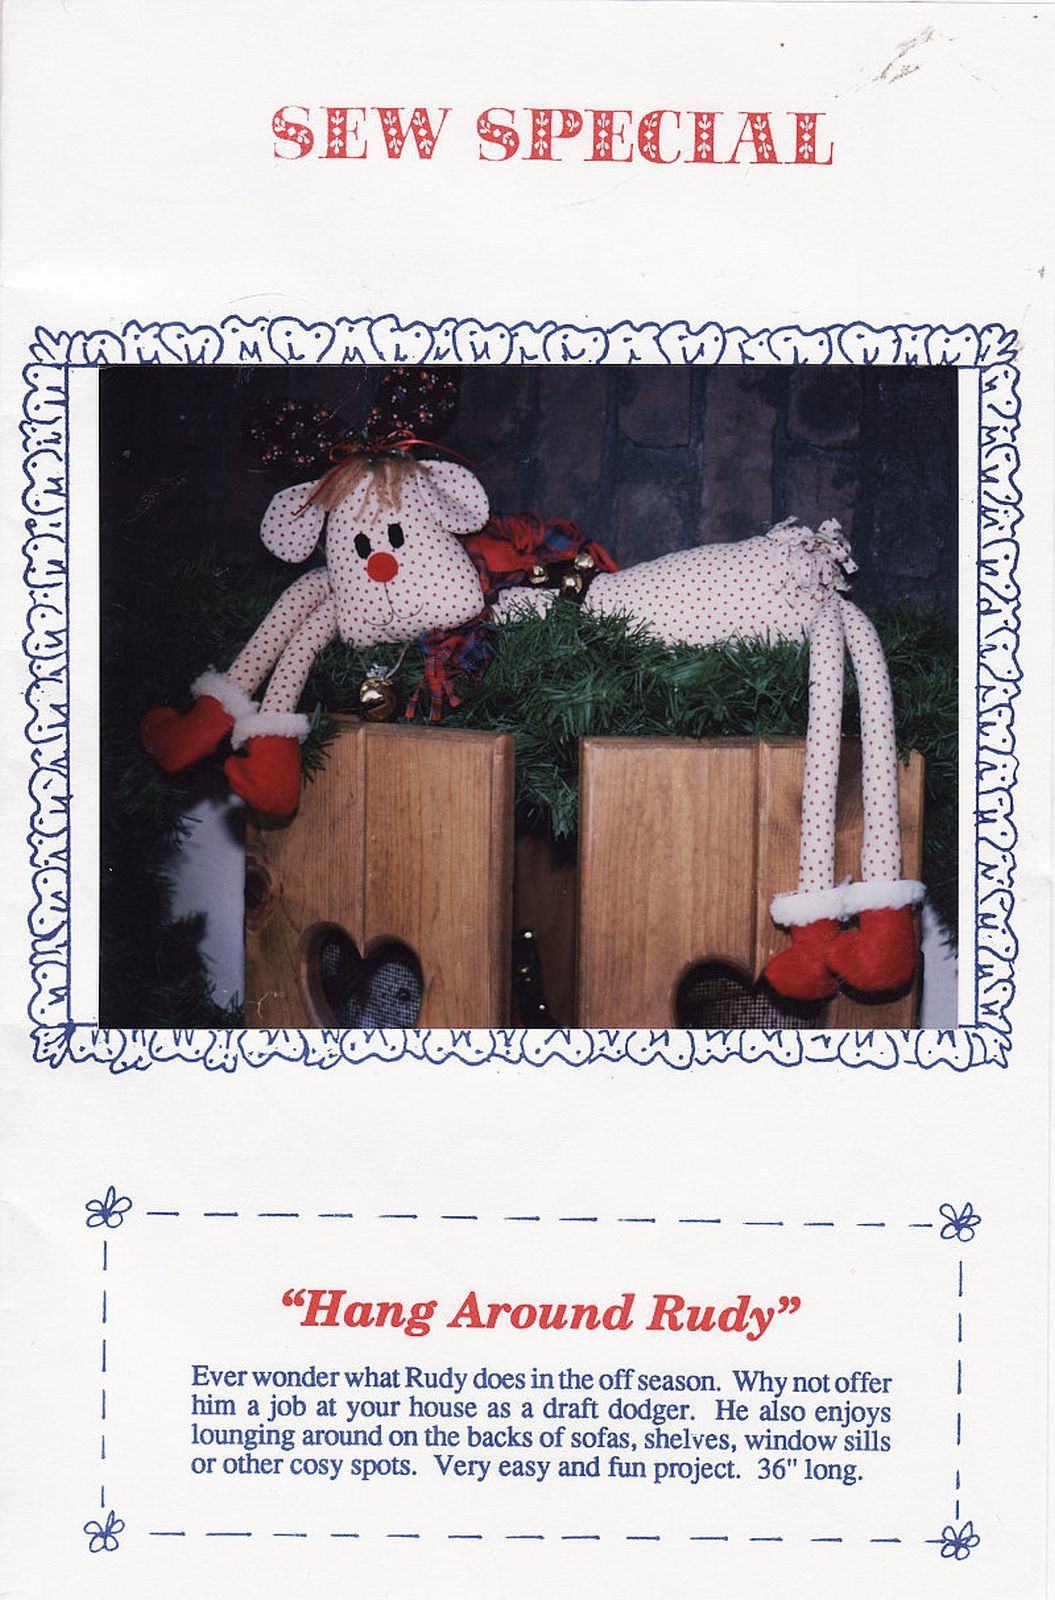 1991 Sew Special Christmas Soft Toy Draft Dodger 36" Hang Around Rudy Kit - $13.99